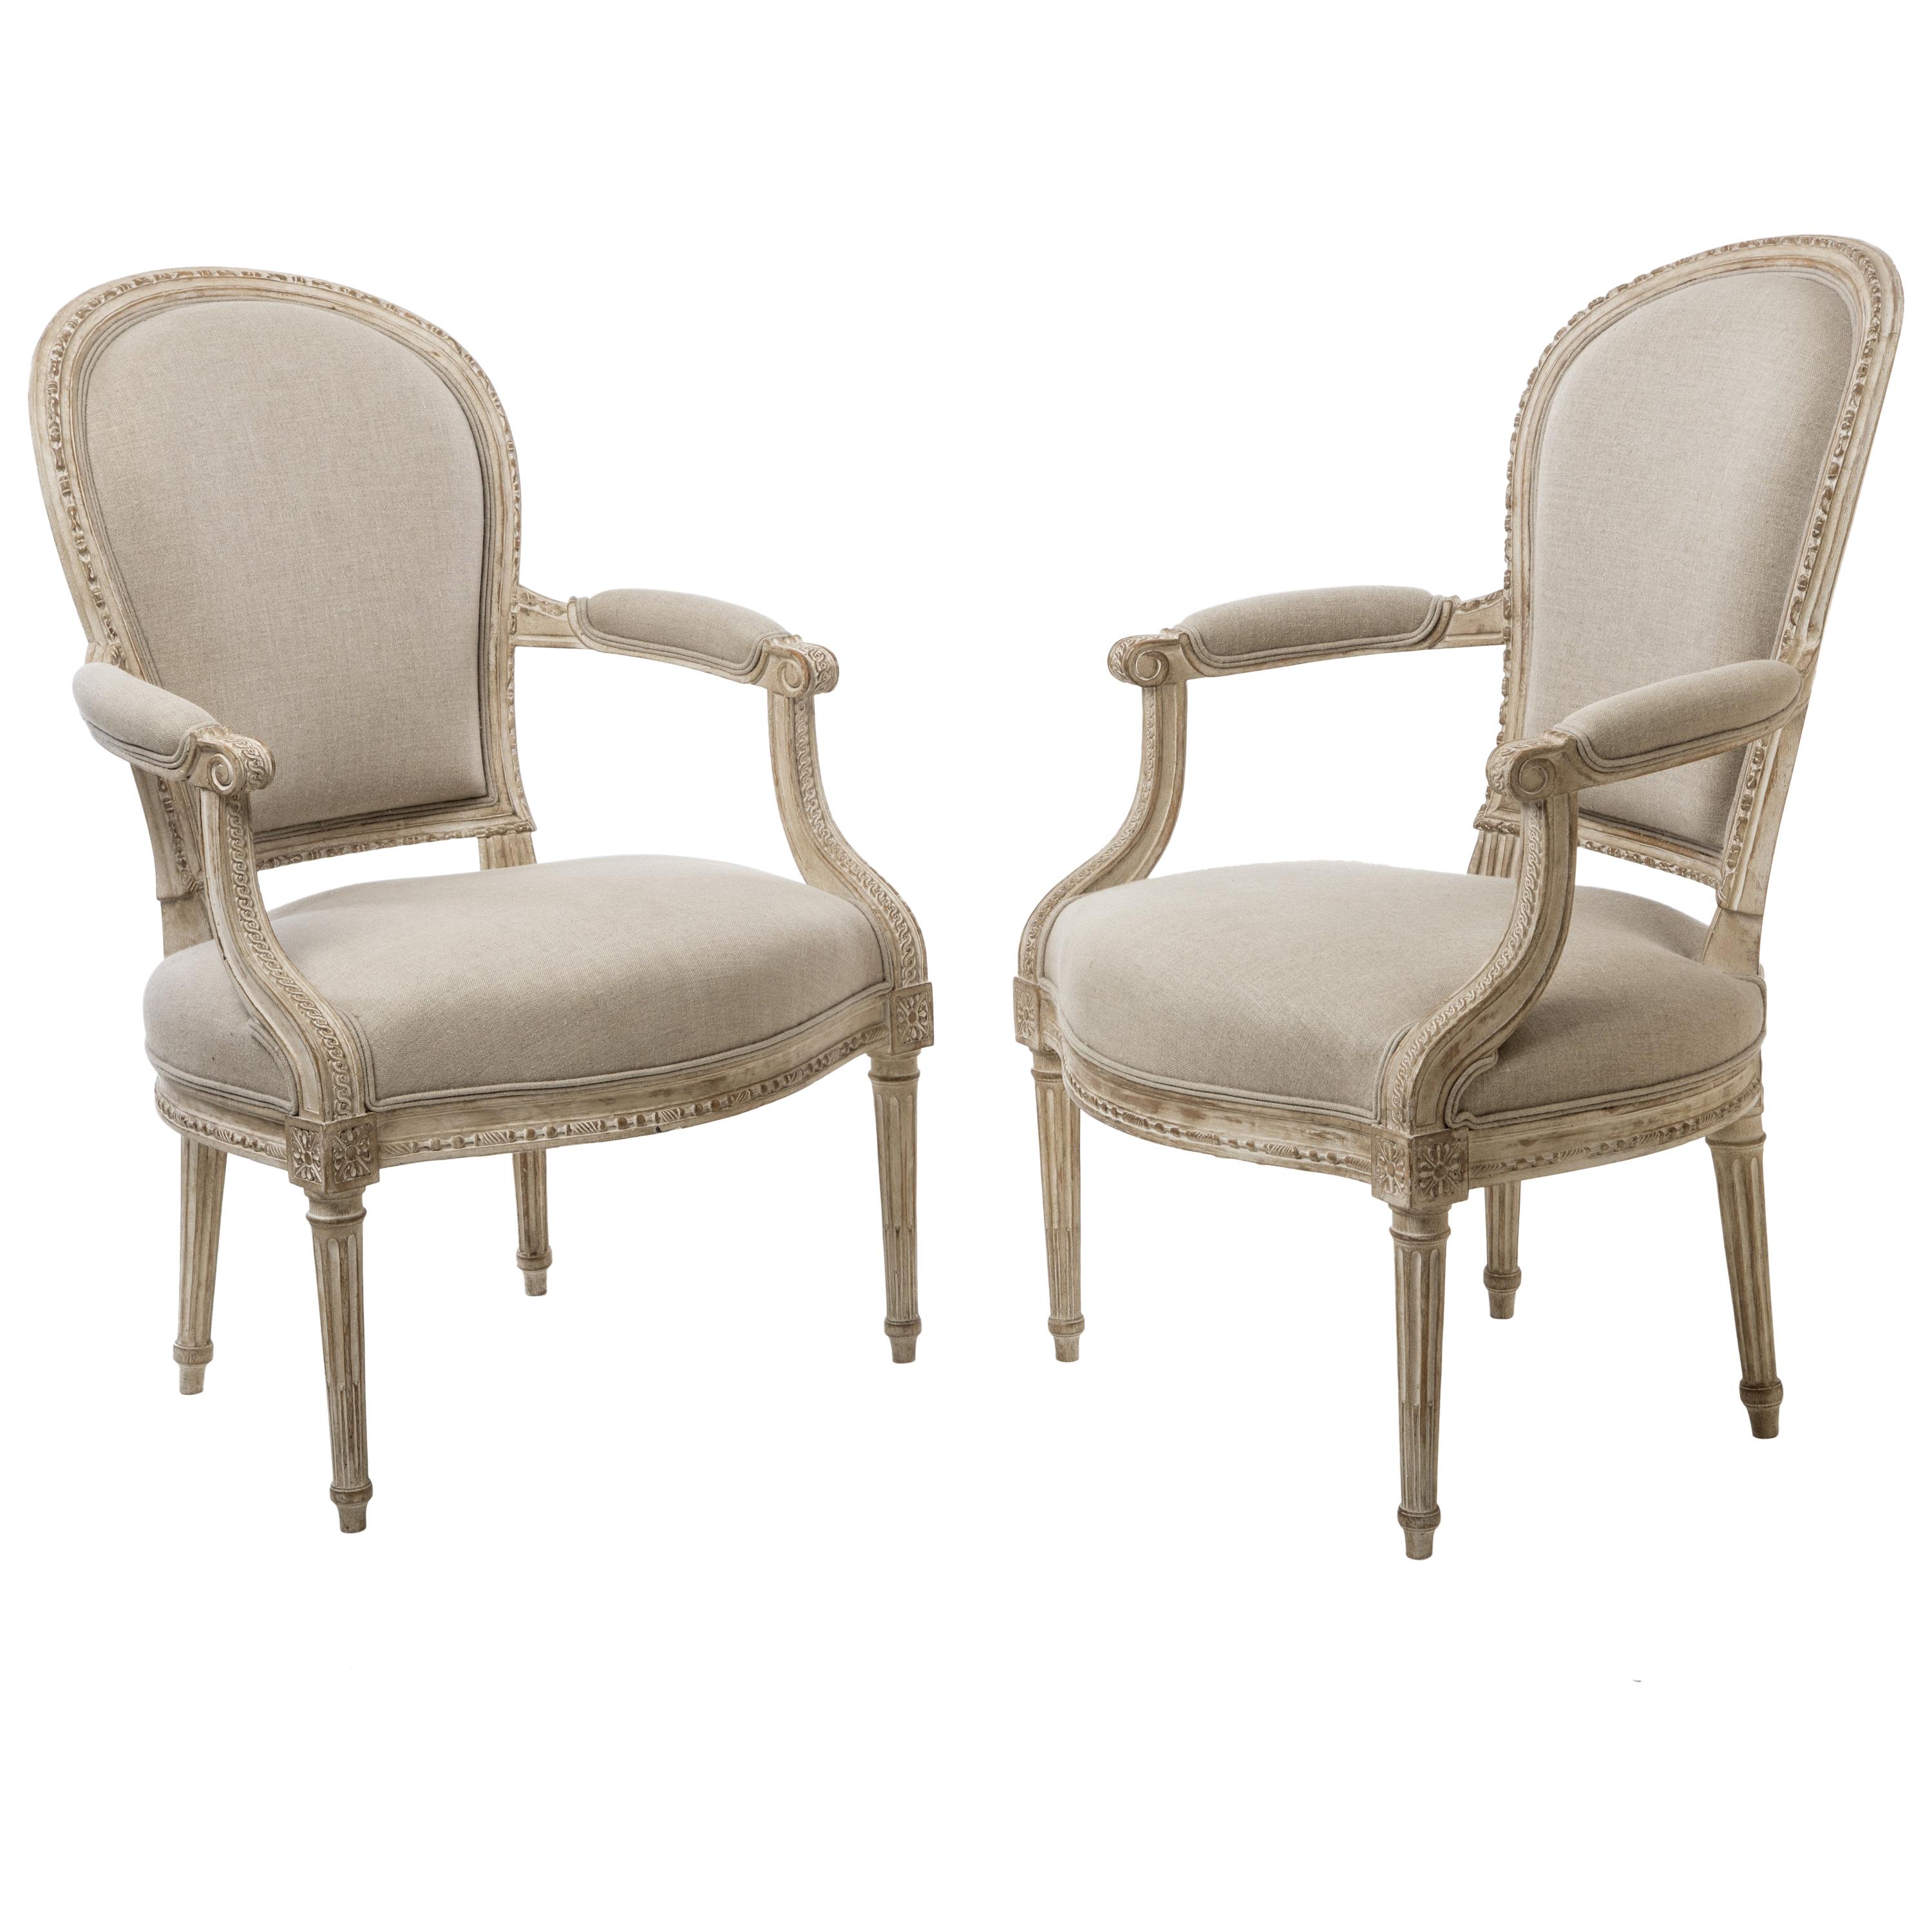 Pair of Delaisement Cabriolet Armchairs in the Style of Louis XVI For Sale